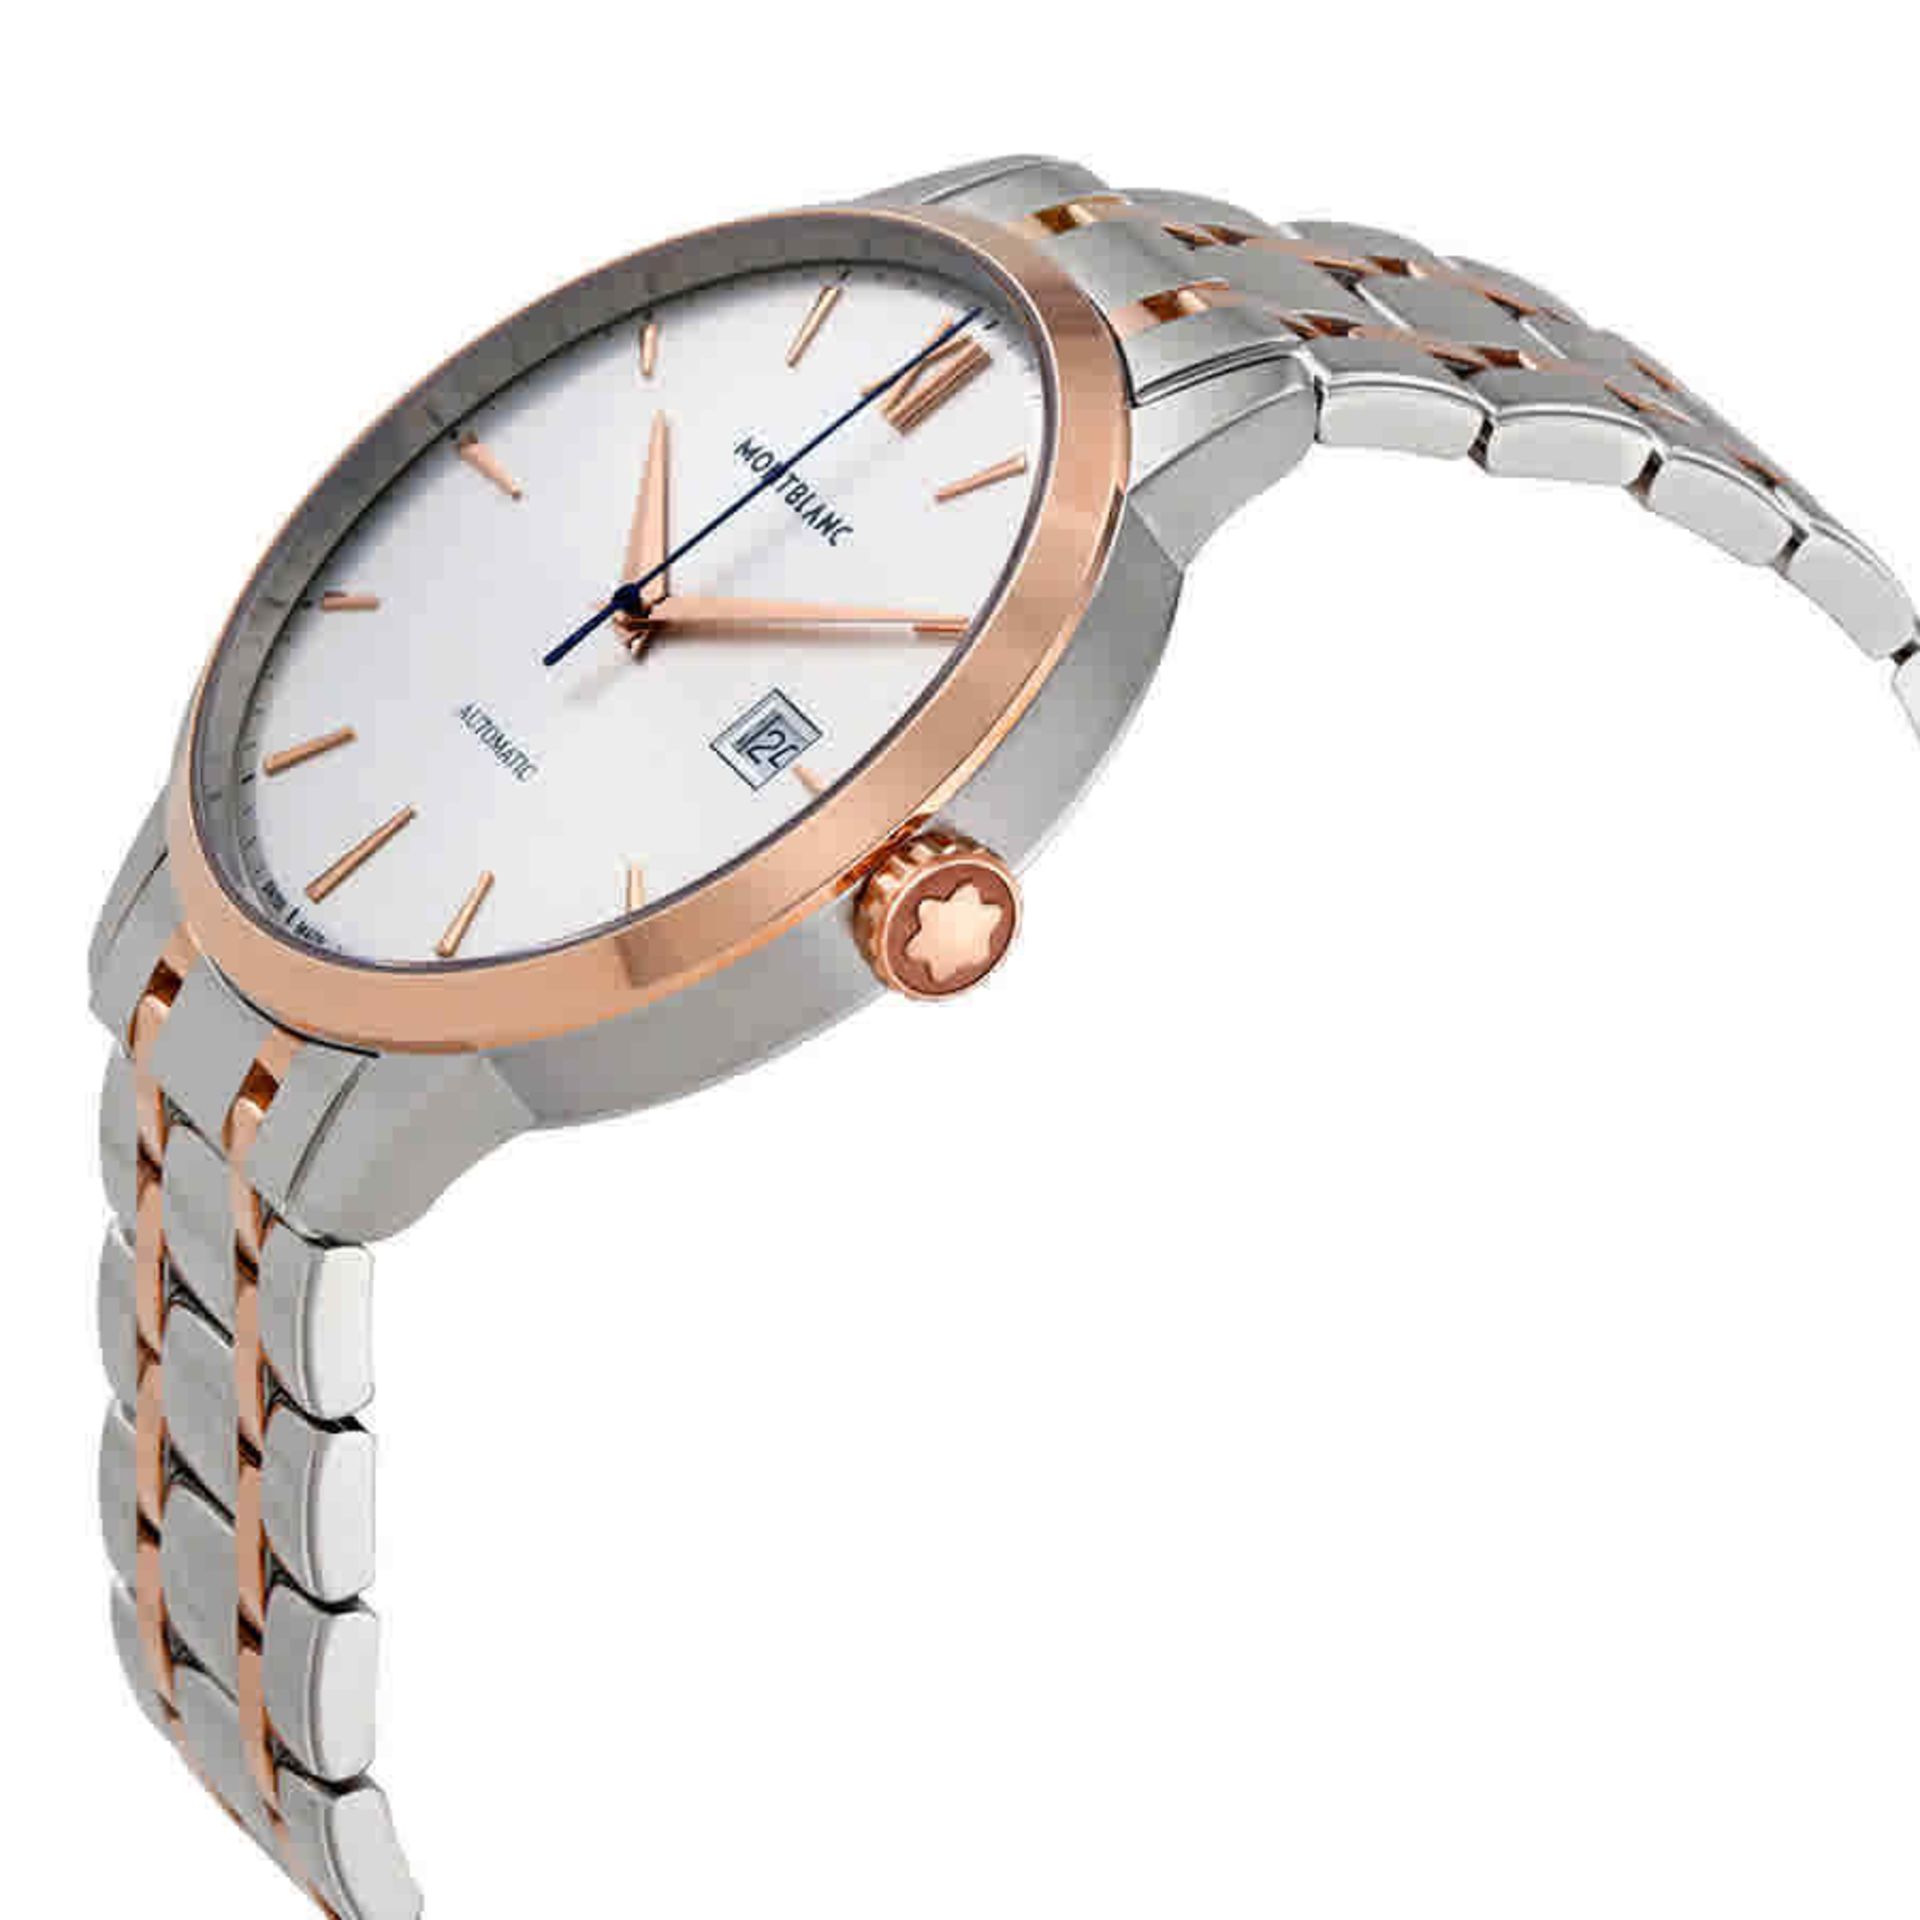 BRAND NEW MONT BLANC HERITAGE SPIRIT DATE STEEL AND ROSE GOLD AUTO 39MM MENS WATCH (887) RRP £5500 - Image 3 of 3